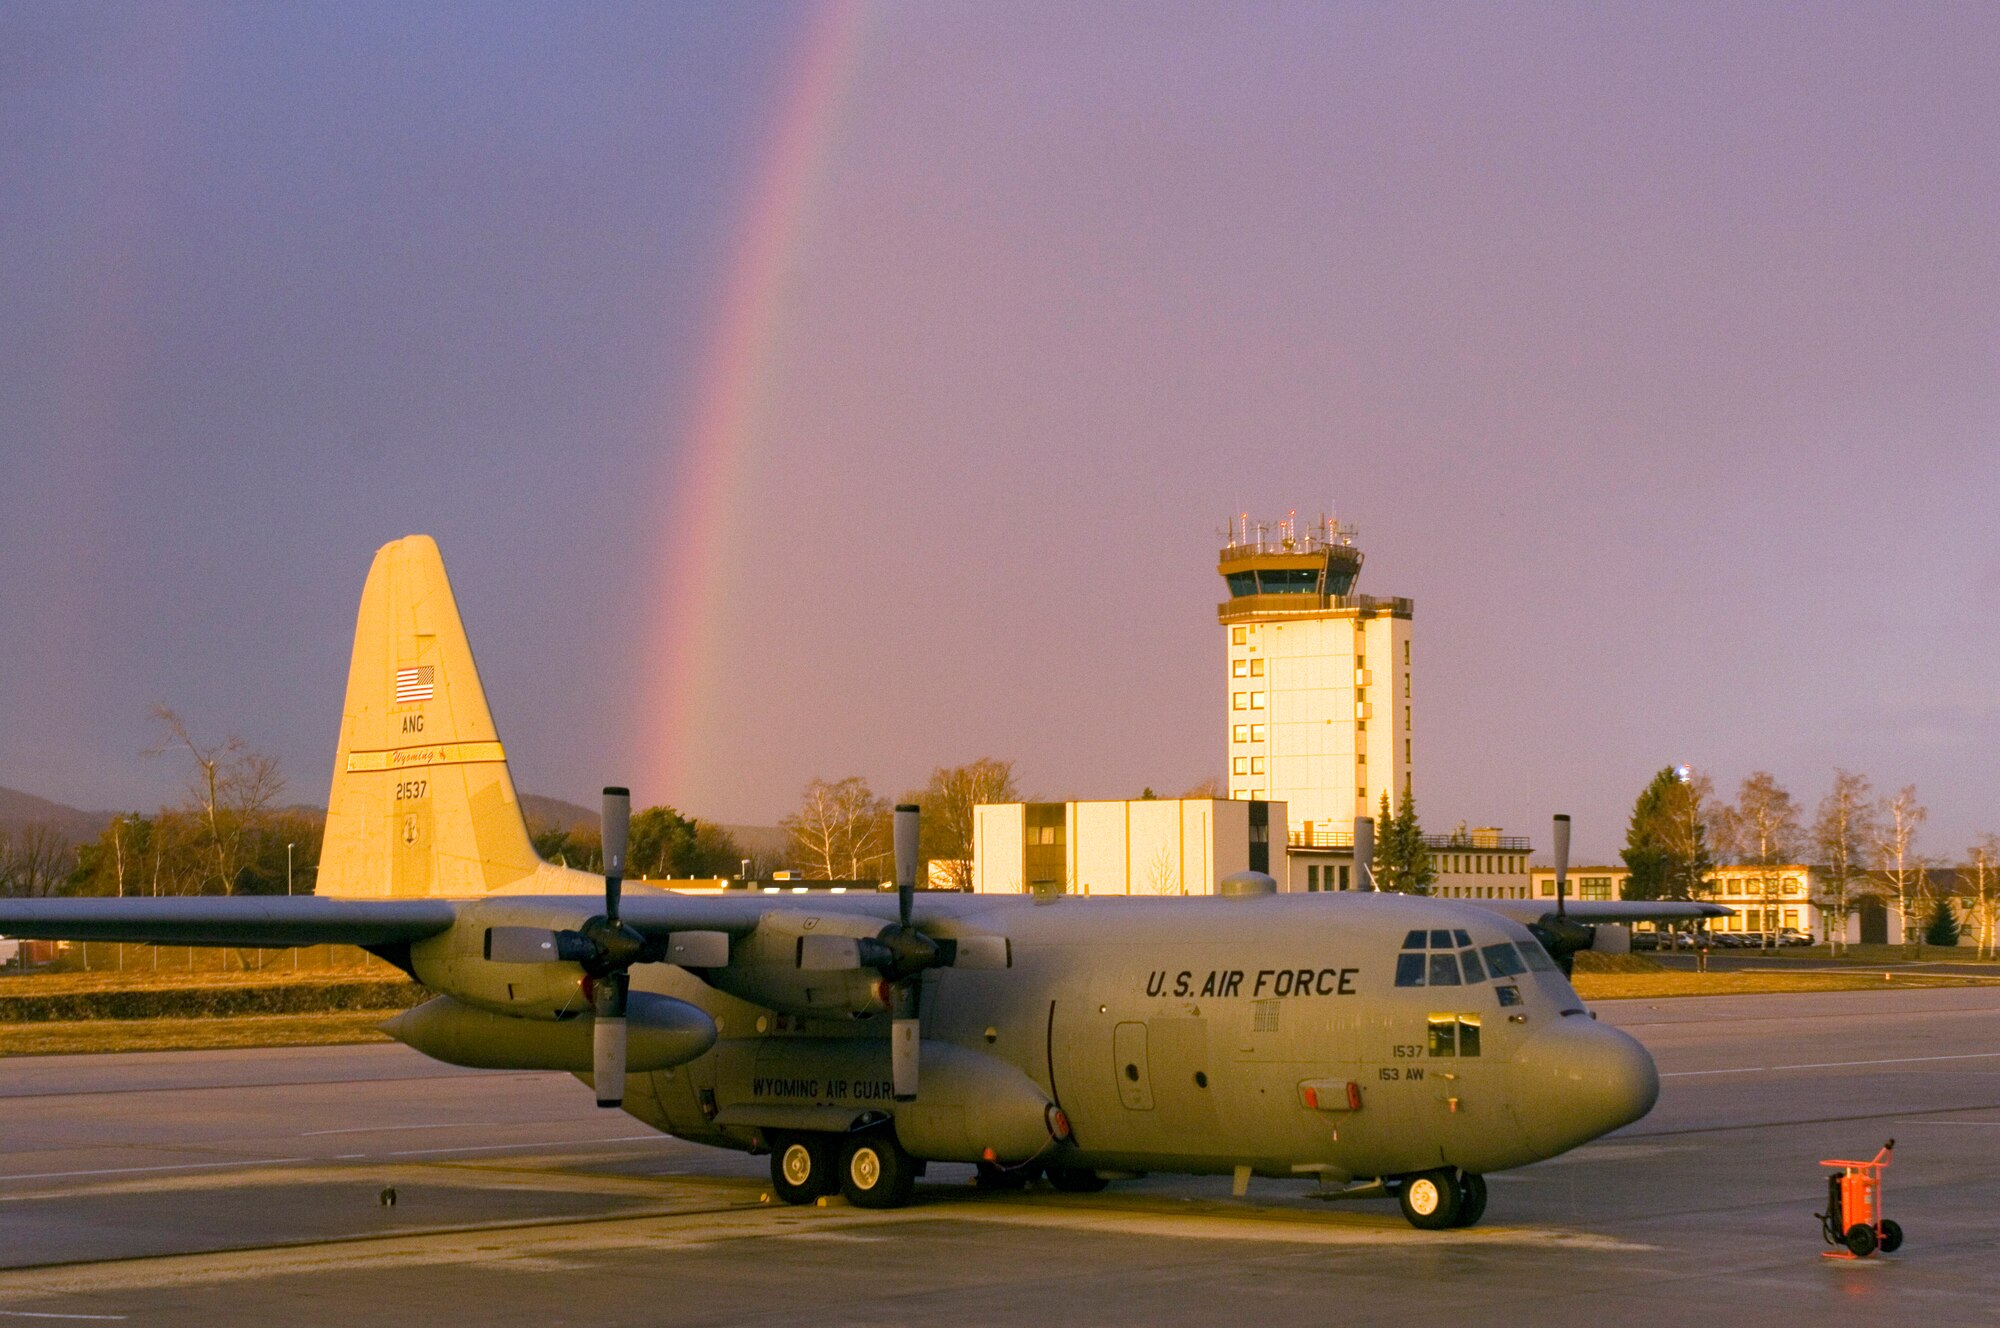 A rainbow appears over a C-130 Hercules and the air traffic control tower at Ramstein Air Base, Germany, on Monday, March 27, 2006. The air transport aircraft belongs to the 187th Airlift Squadron of the Wyoming Air National Guard in Cheyenne. (U.S. Air Force photo/Master Sgt. John E. Lasky)